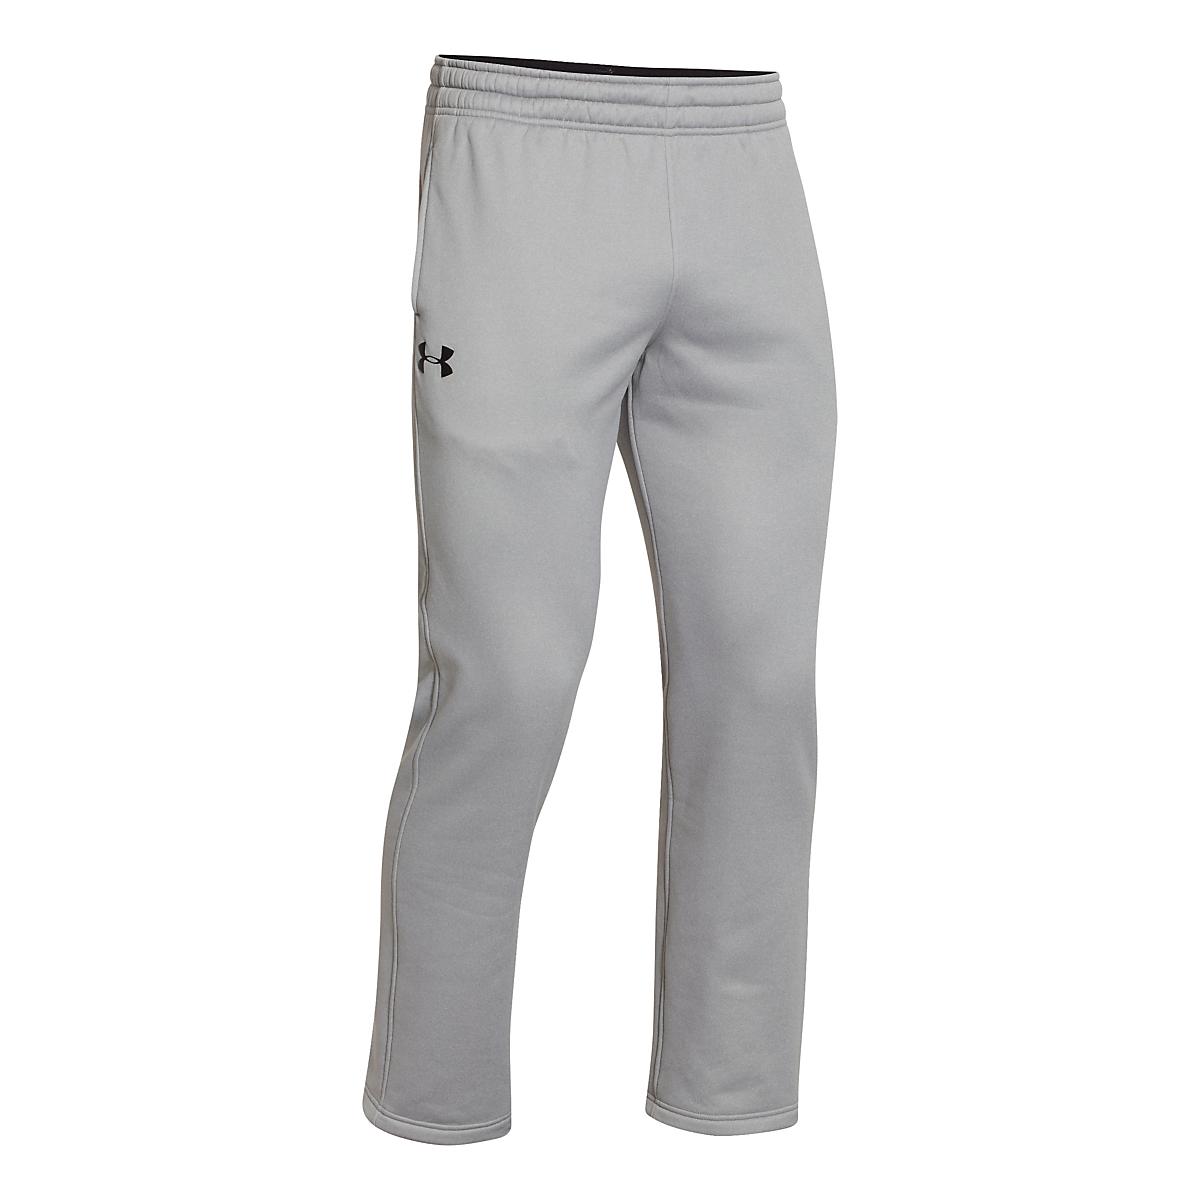 Mens Under Armour Fleece Storm Pants at Road Runner Sports